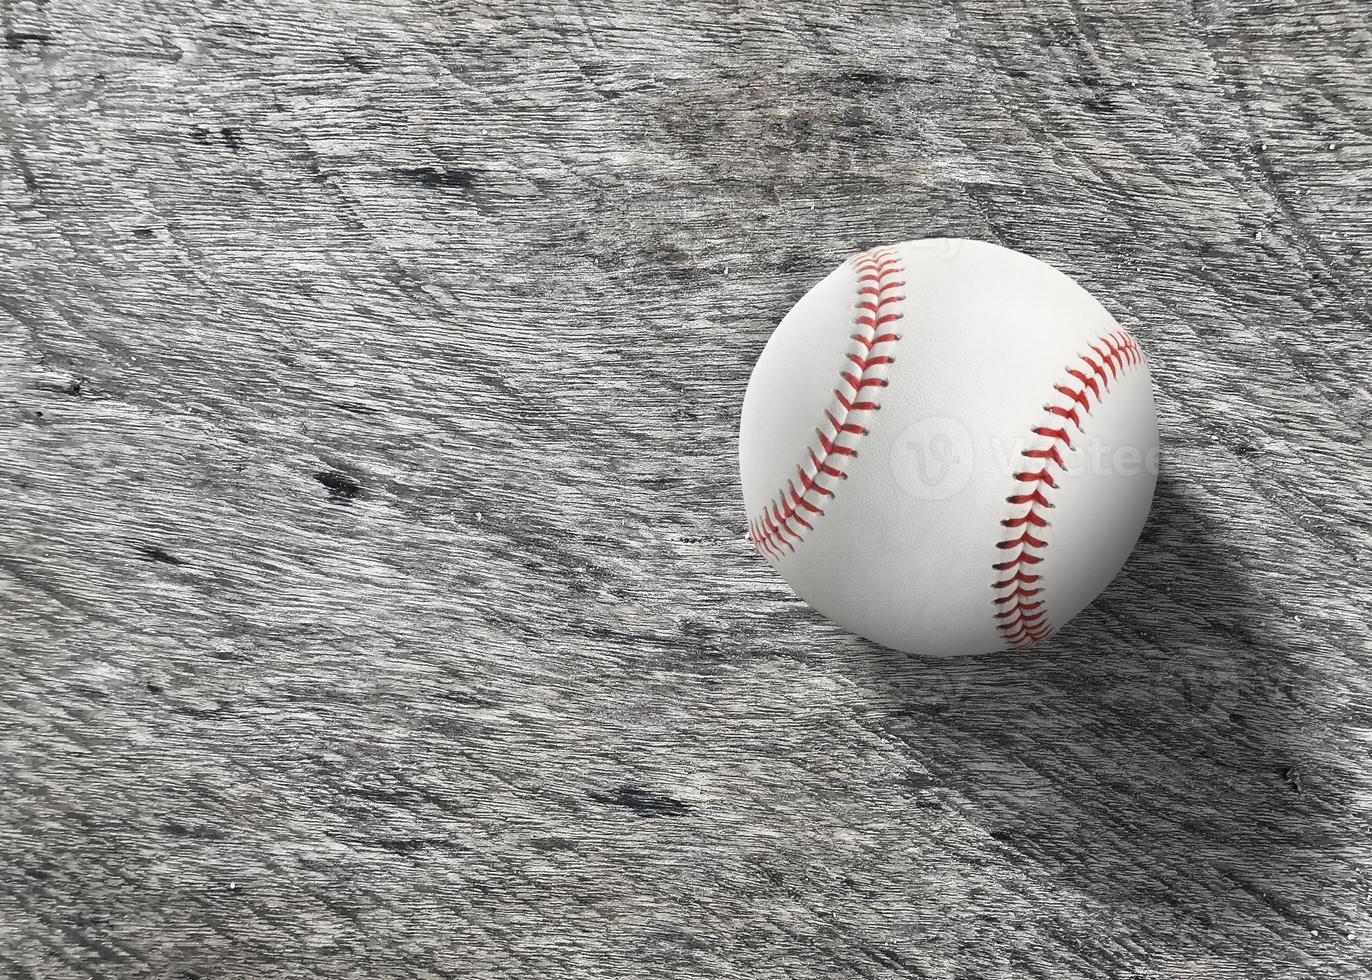 Baseball on wooden board turf close-up. Top view photo